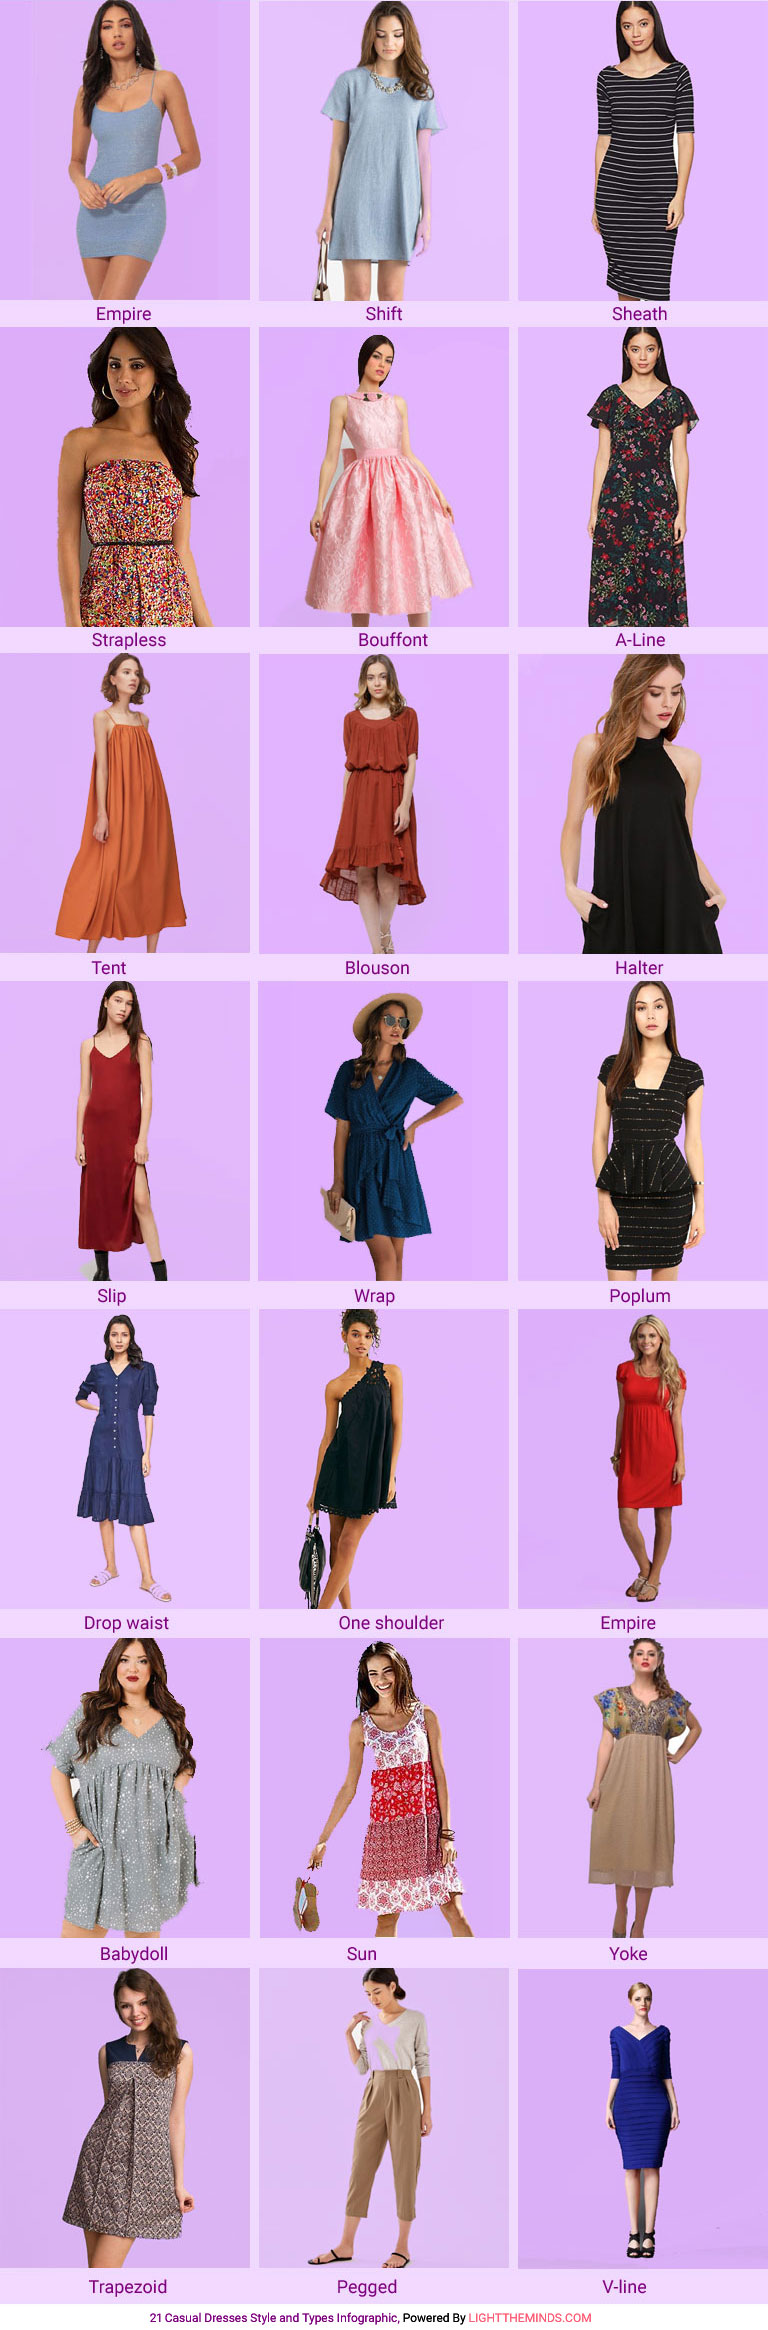 Women Casual Dresses Style and Types